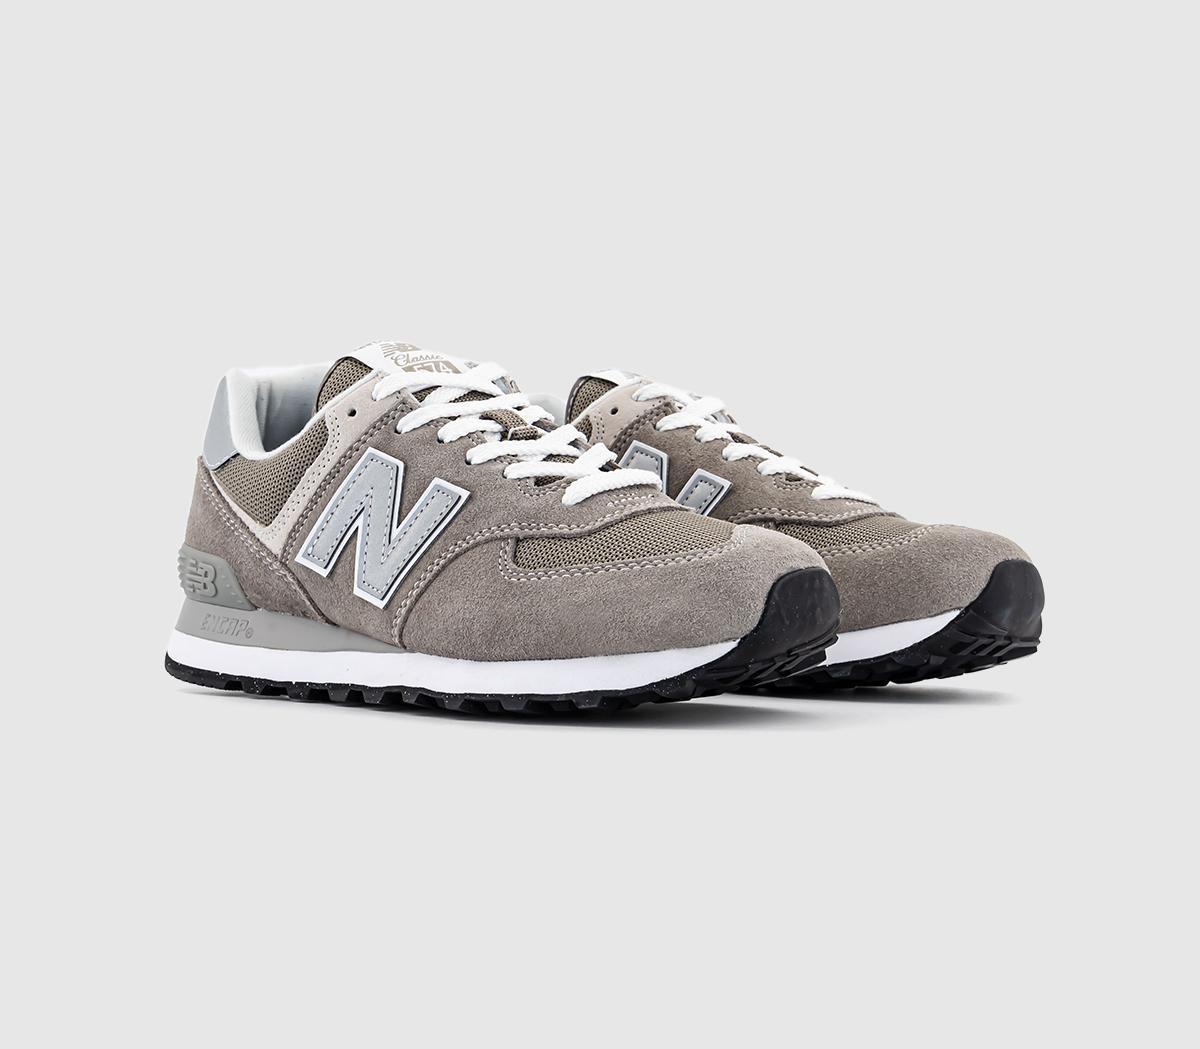 New Balance Mens 574 Trainers Grey White Green Leaf Rubber, 7